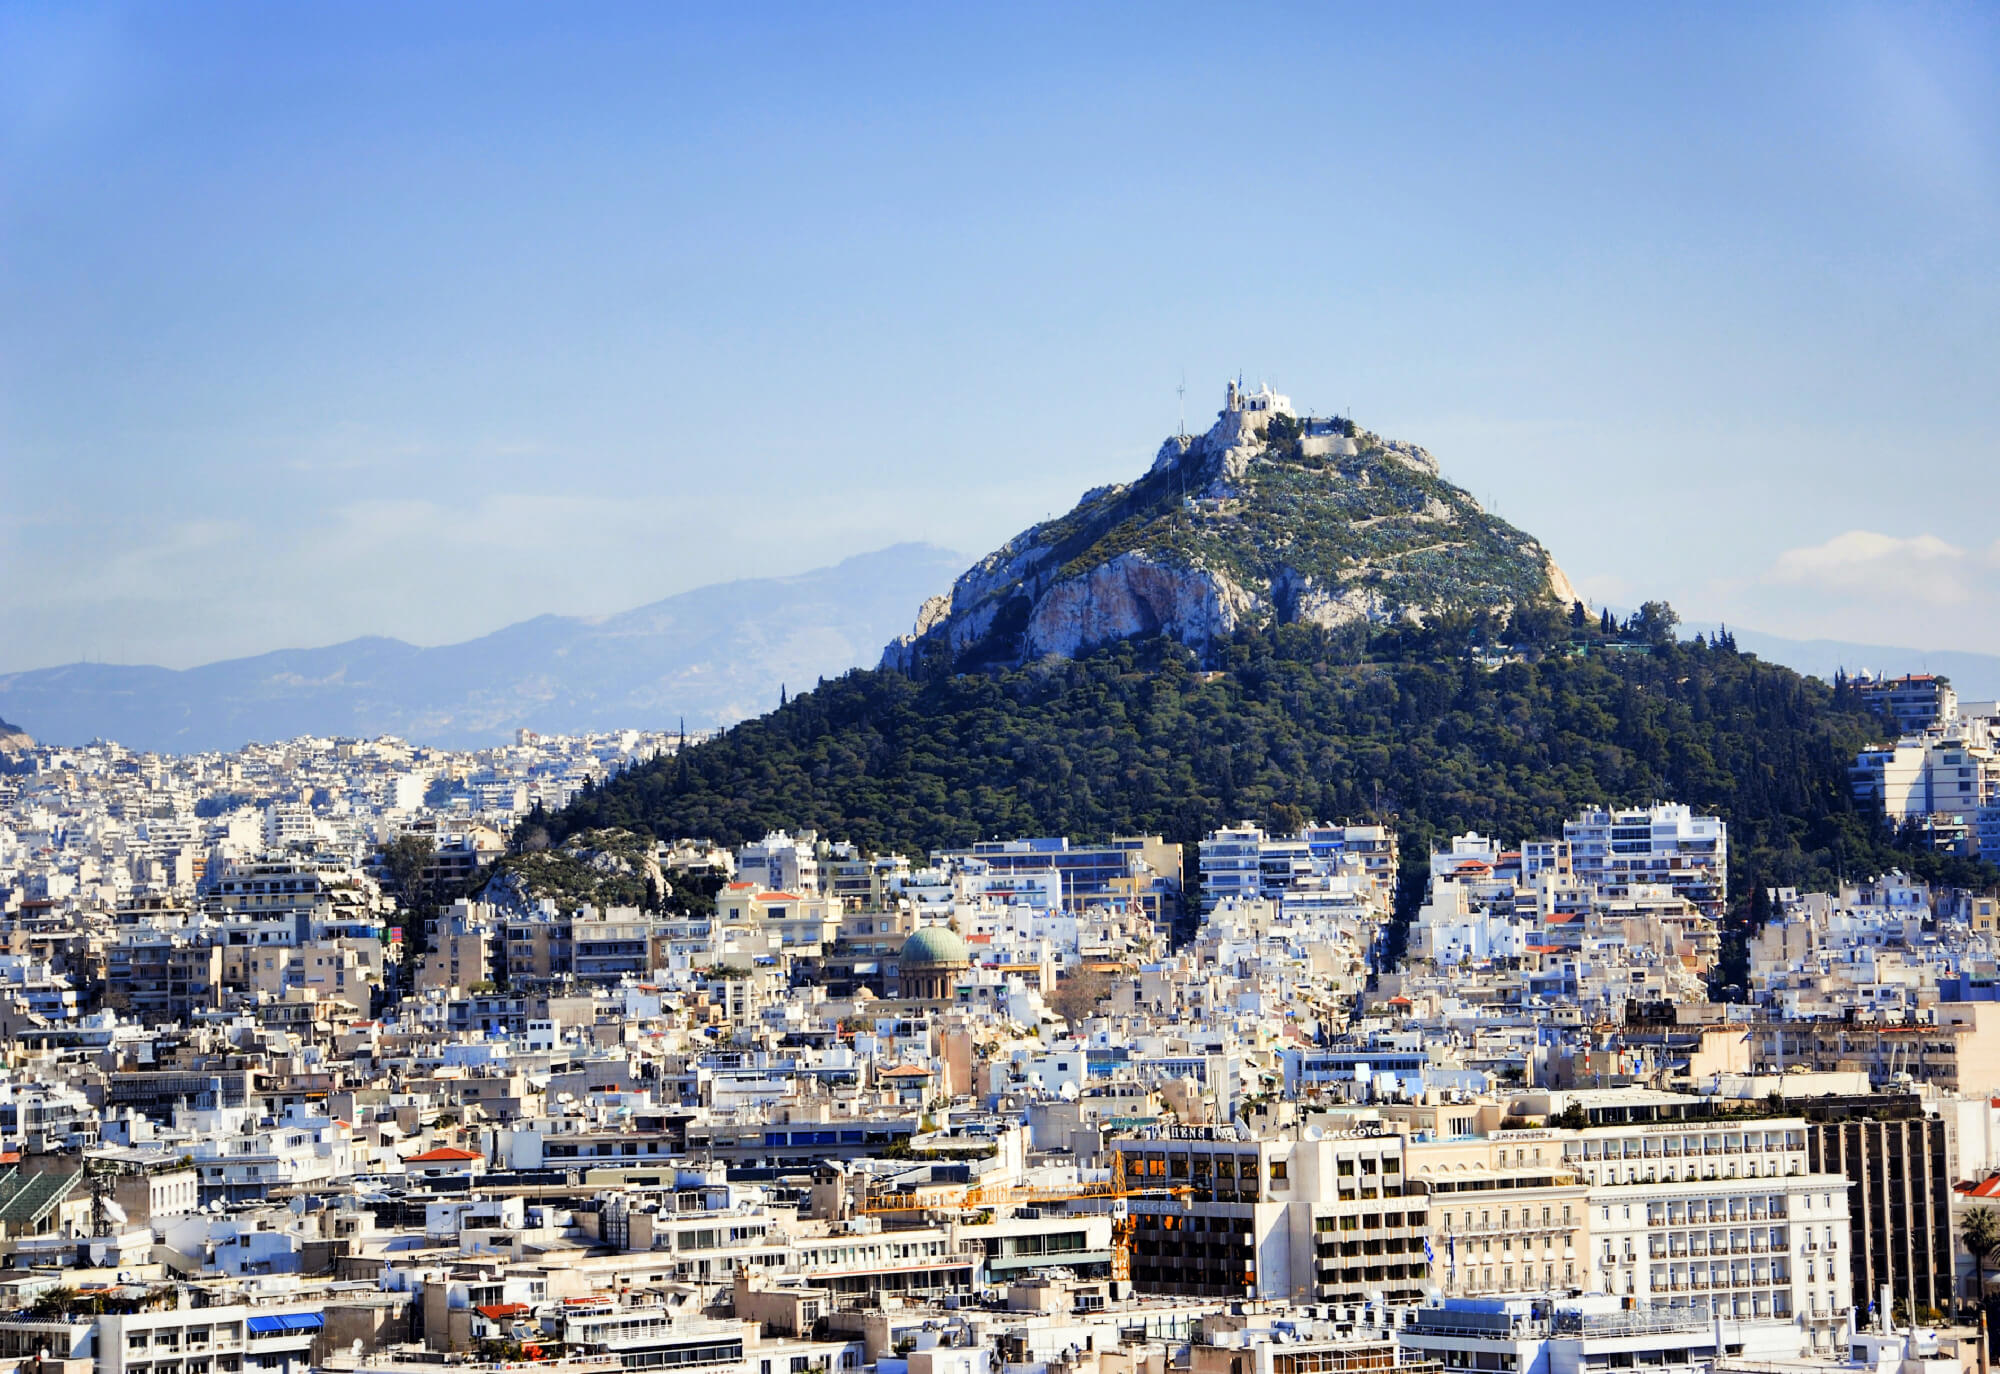 Mount Lycabettus is something to conquer while seeing Athens in 3 days!